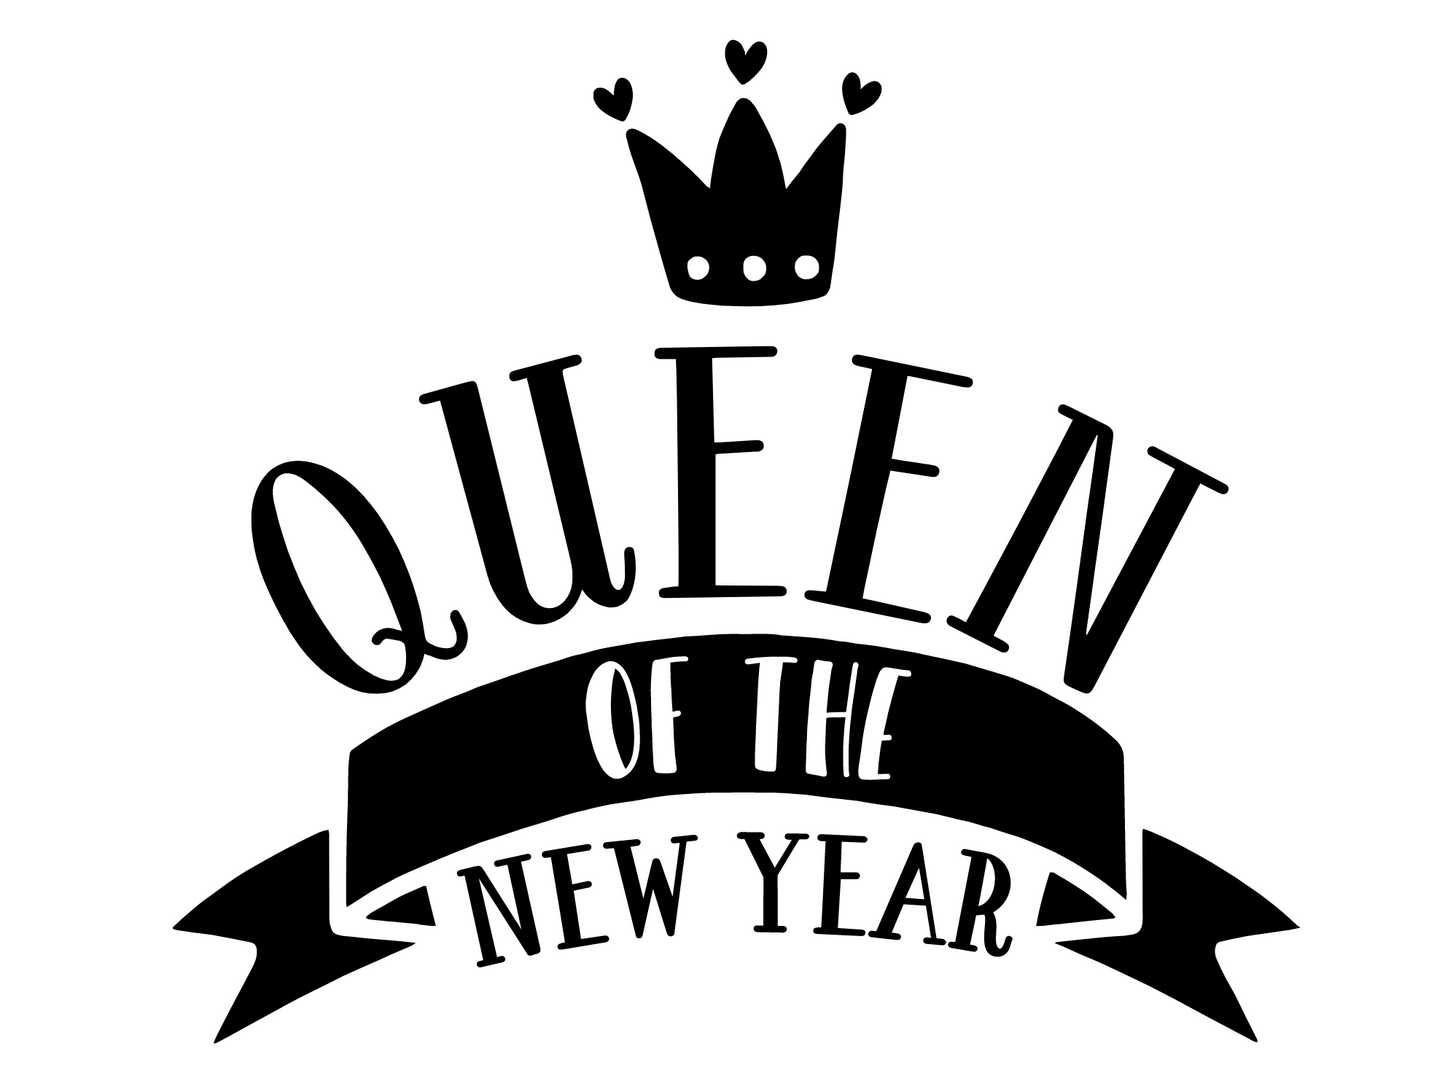 Queen of the New Year Vinyl Add-on